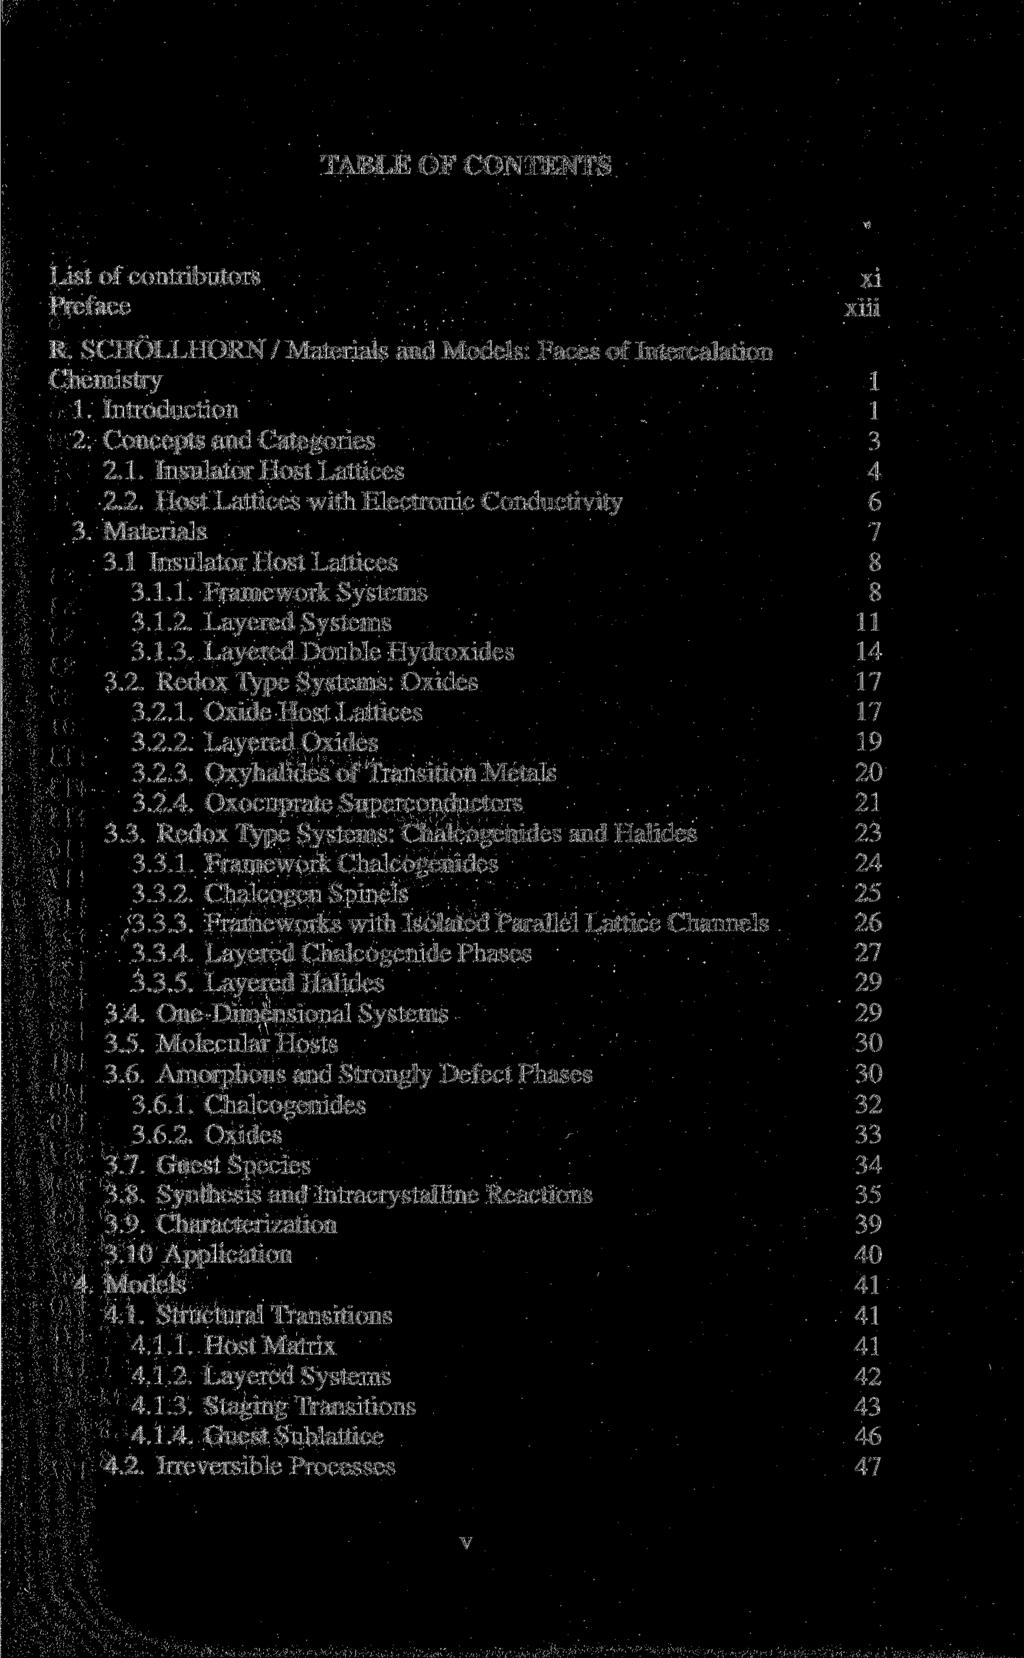 TABLE OF CONTENTS List of contributors Preface xi xiii R. SCHÖLLHORN / Materials and Models: Faces of Intercalation Chemistry 1 1. Introduction 1 2. Concepts and Categories 3 2.1. Insulator Host Lattices 4 2.